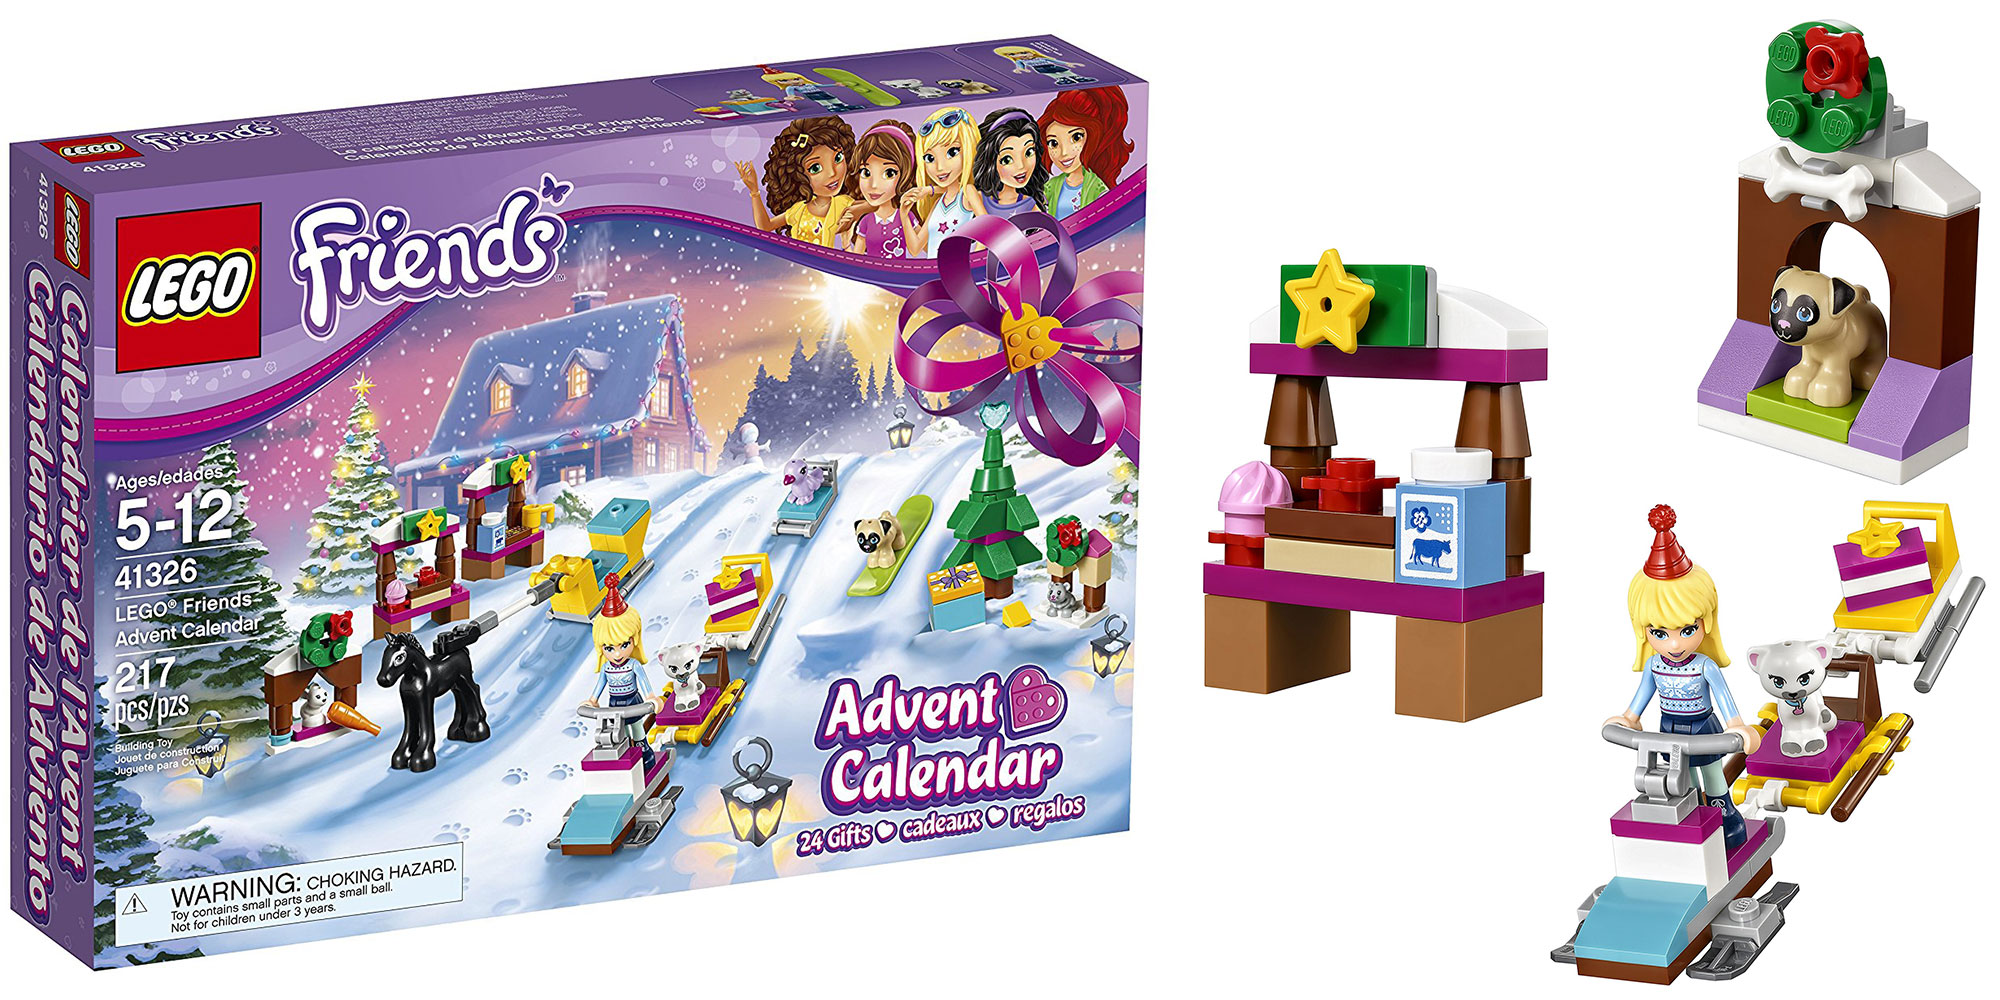 LEGO Friends Advent help countdown to Christmas on their first sale